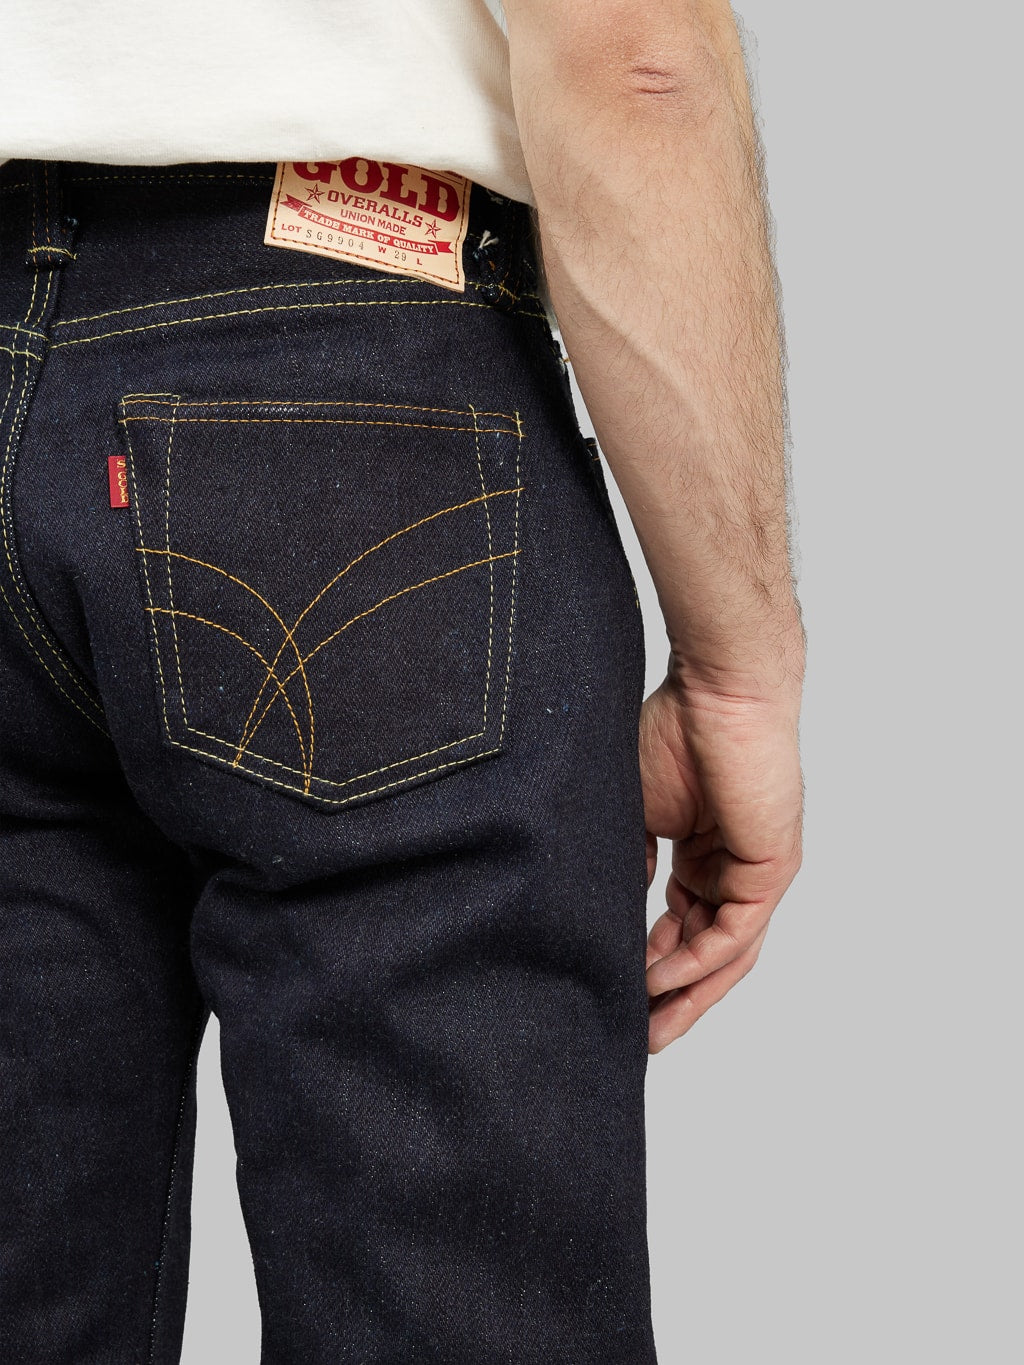 The Strike Gold Extra Heavyweight straight tapered jeans pocket detail